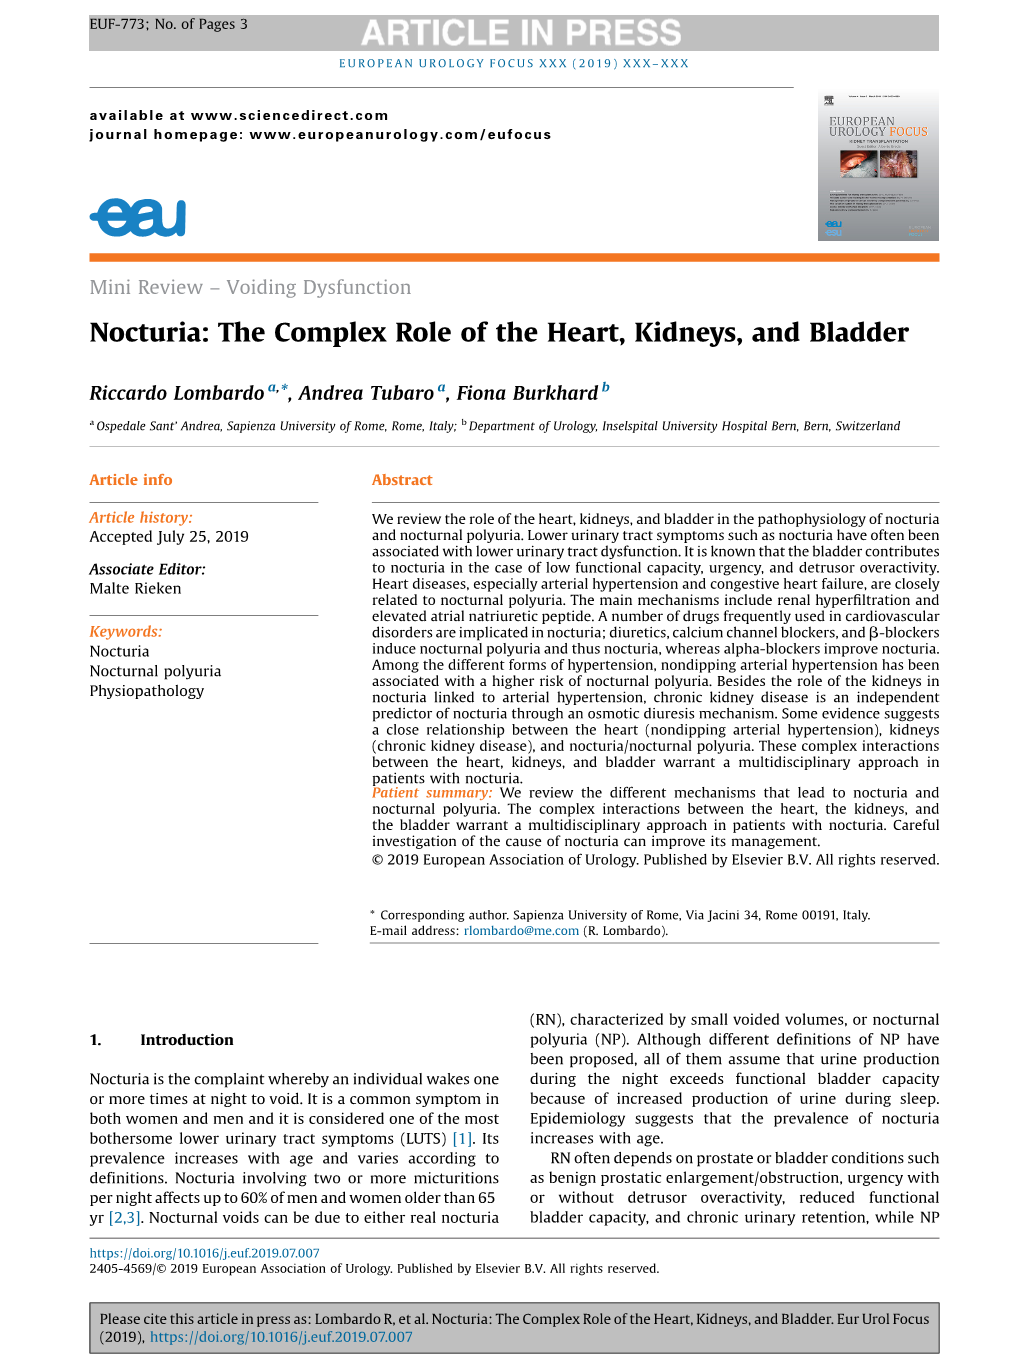 Nocturia: the Complex Role of the Heart, Kidneys, and Bladder